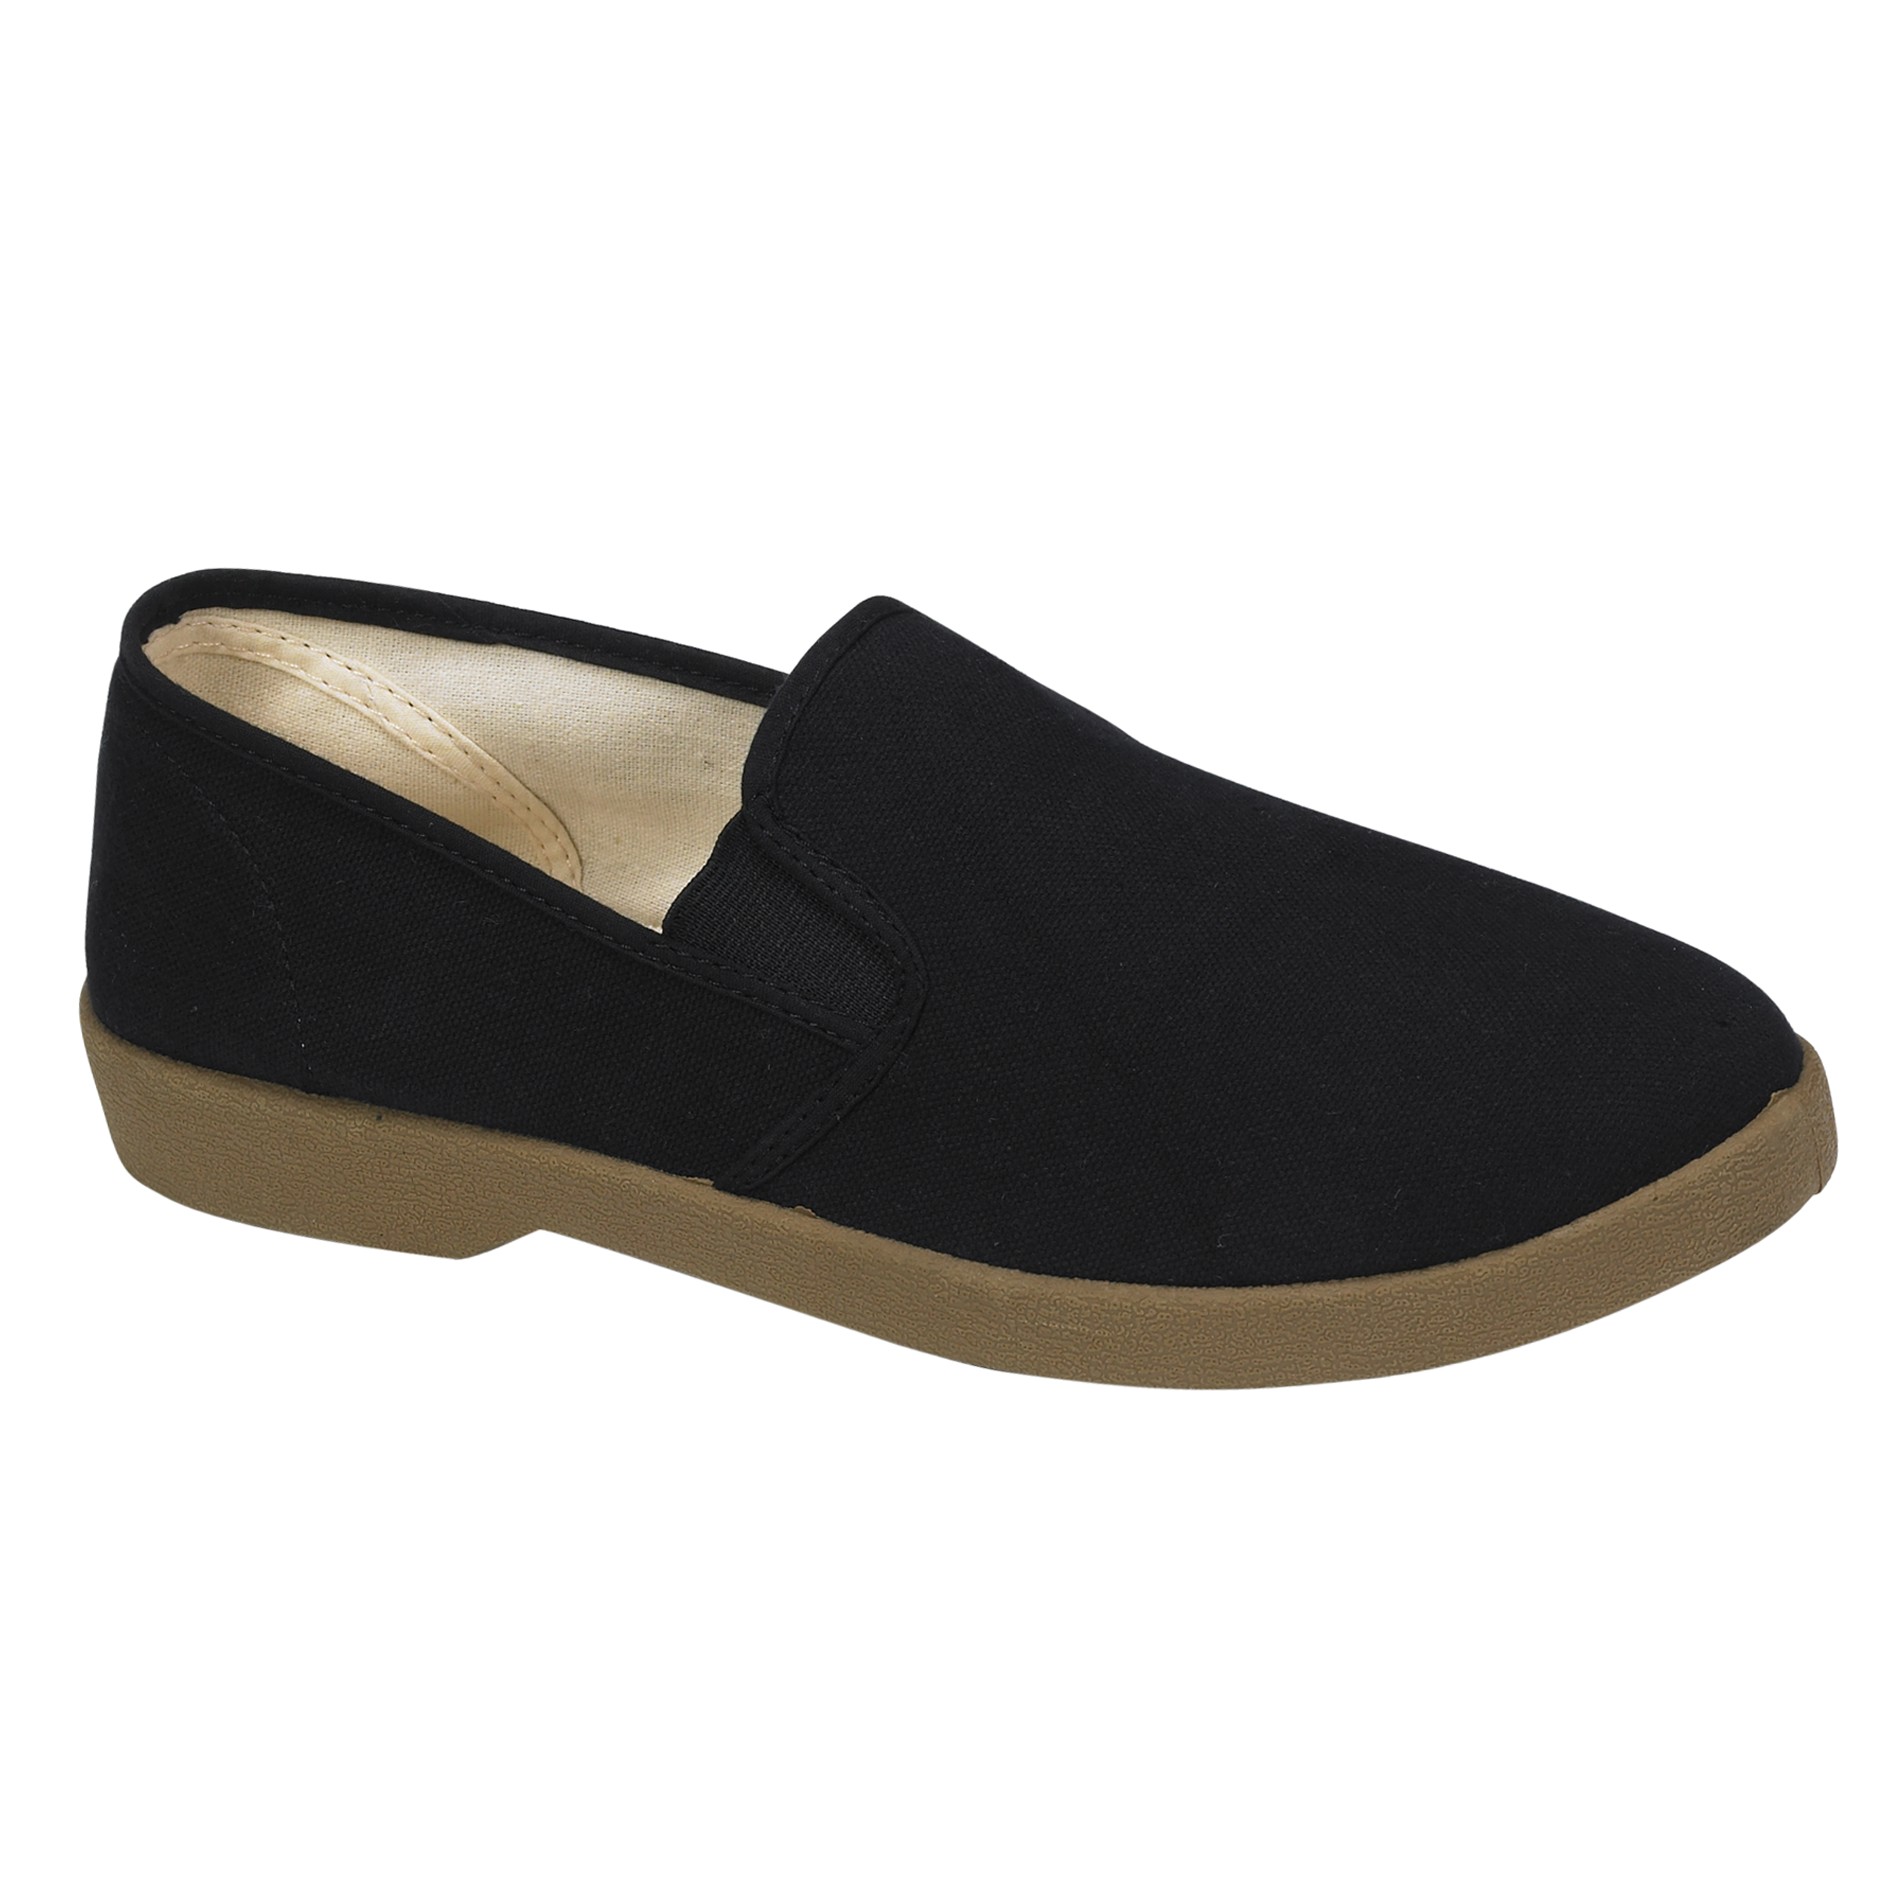 basic editions canvas slip ons cheap online